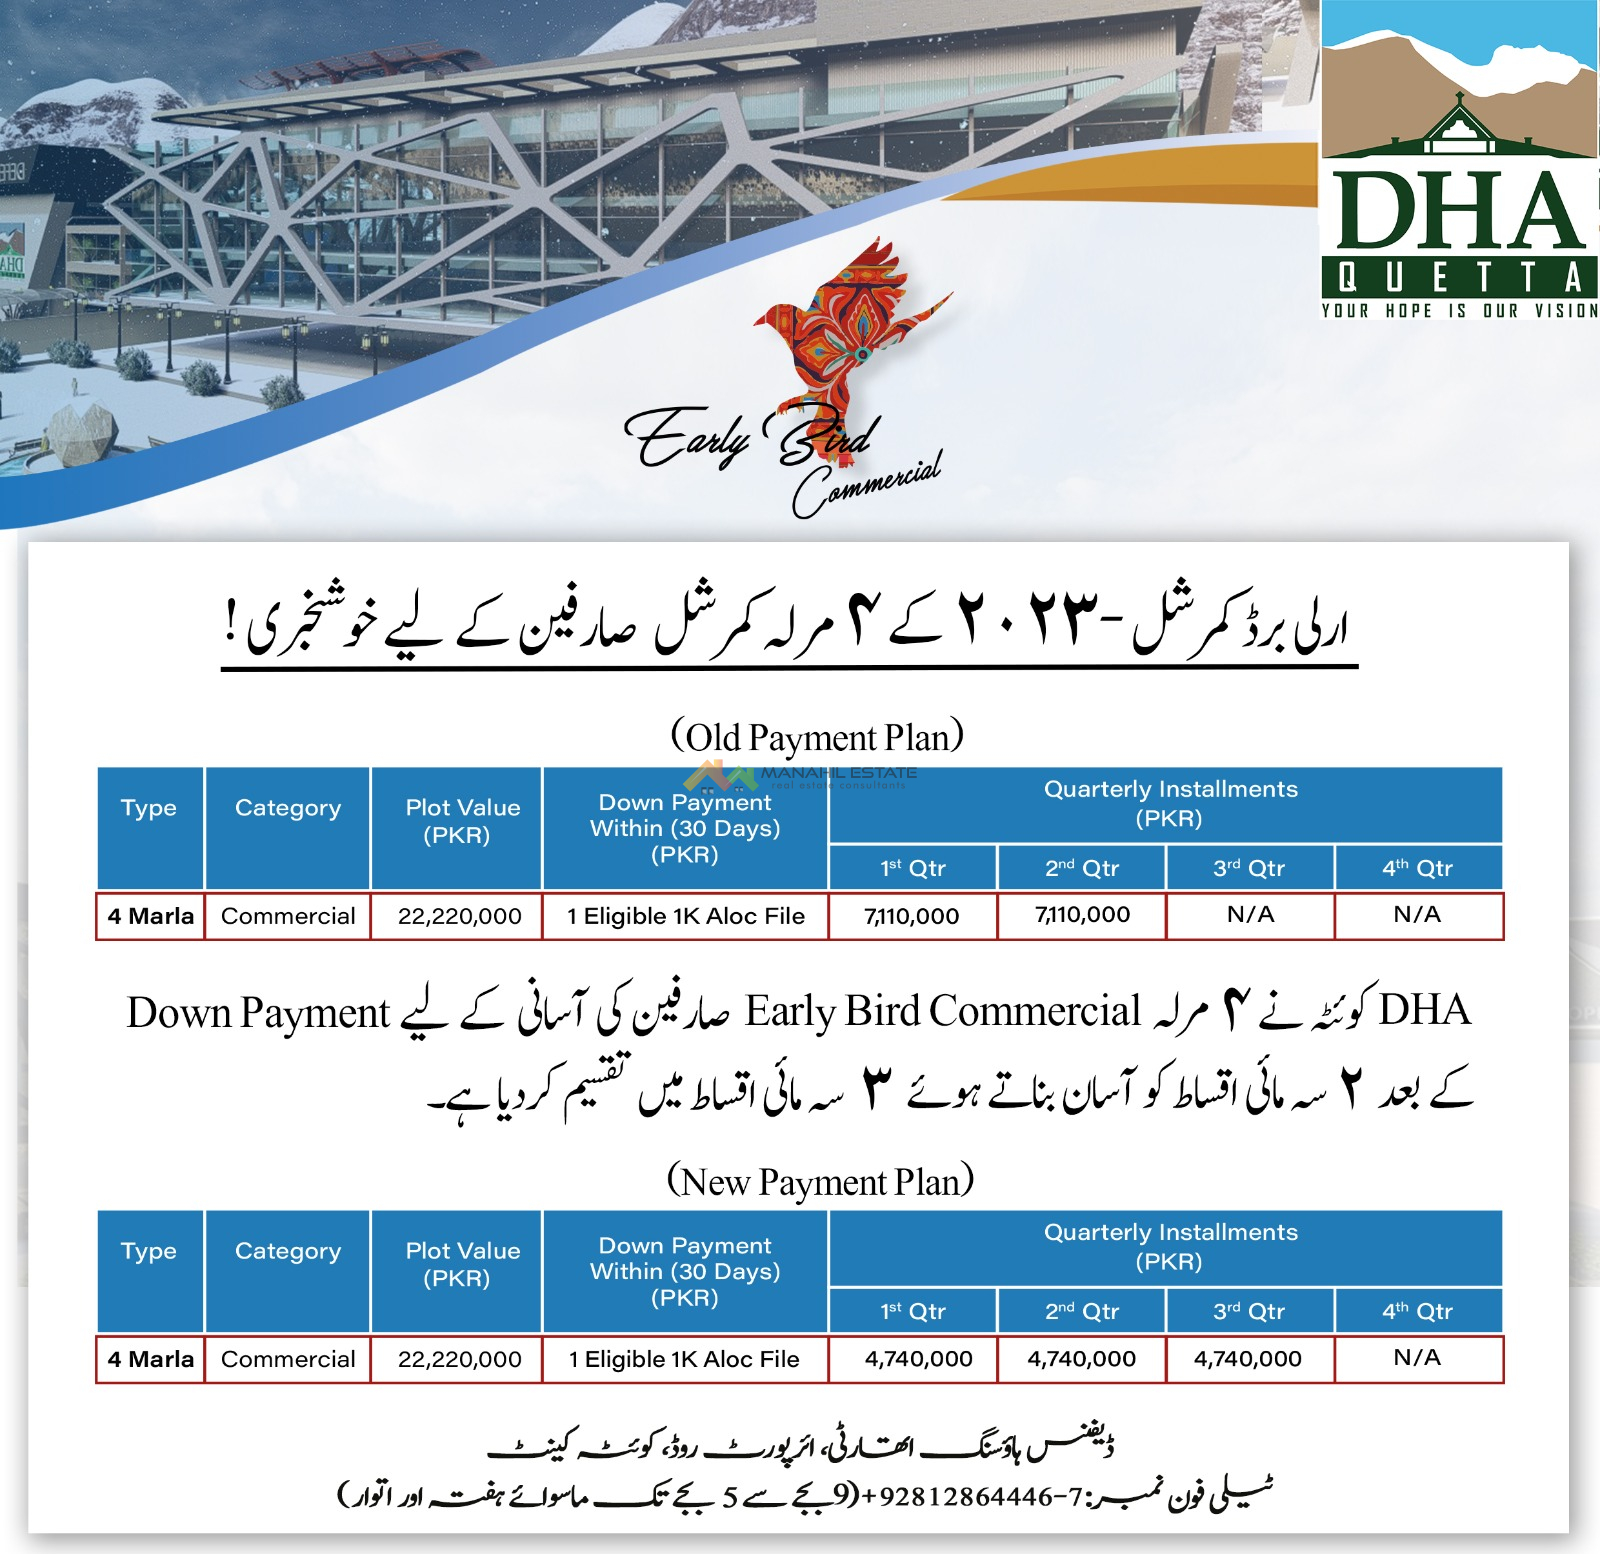 DHA Quetta's new payment plan for Early bird Commercials